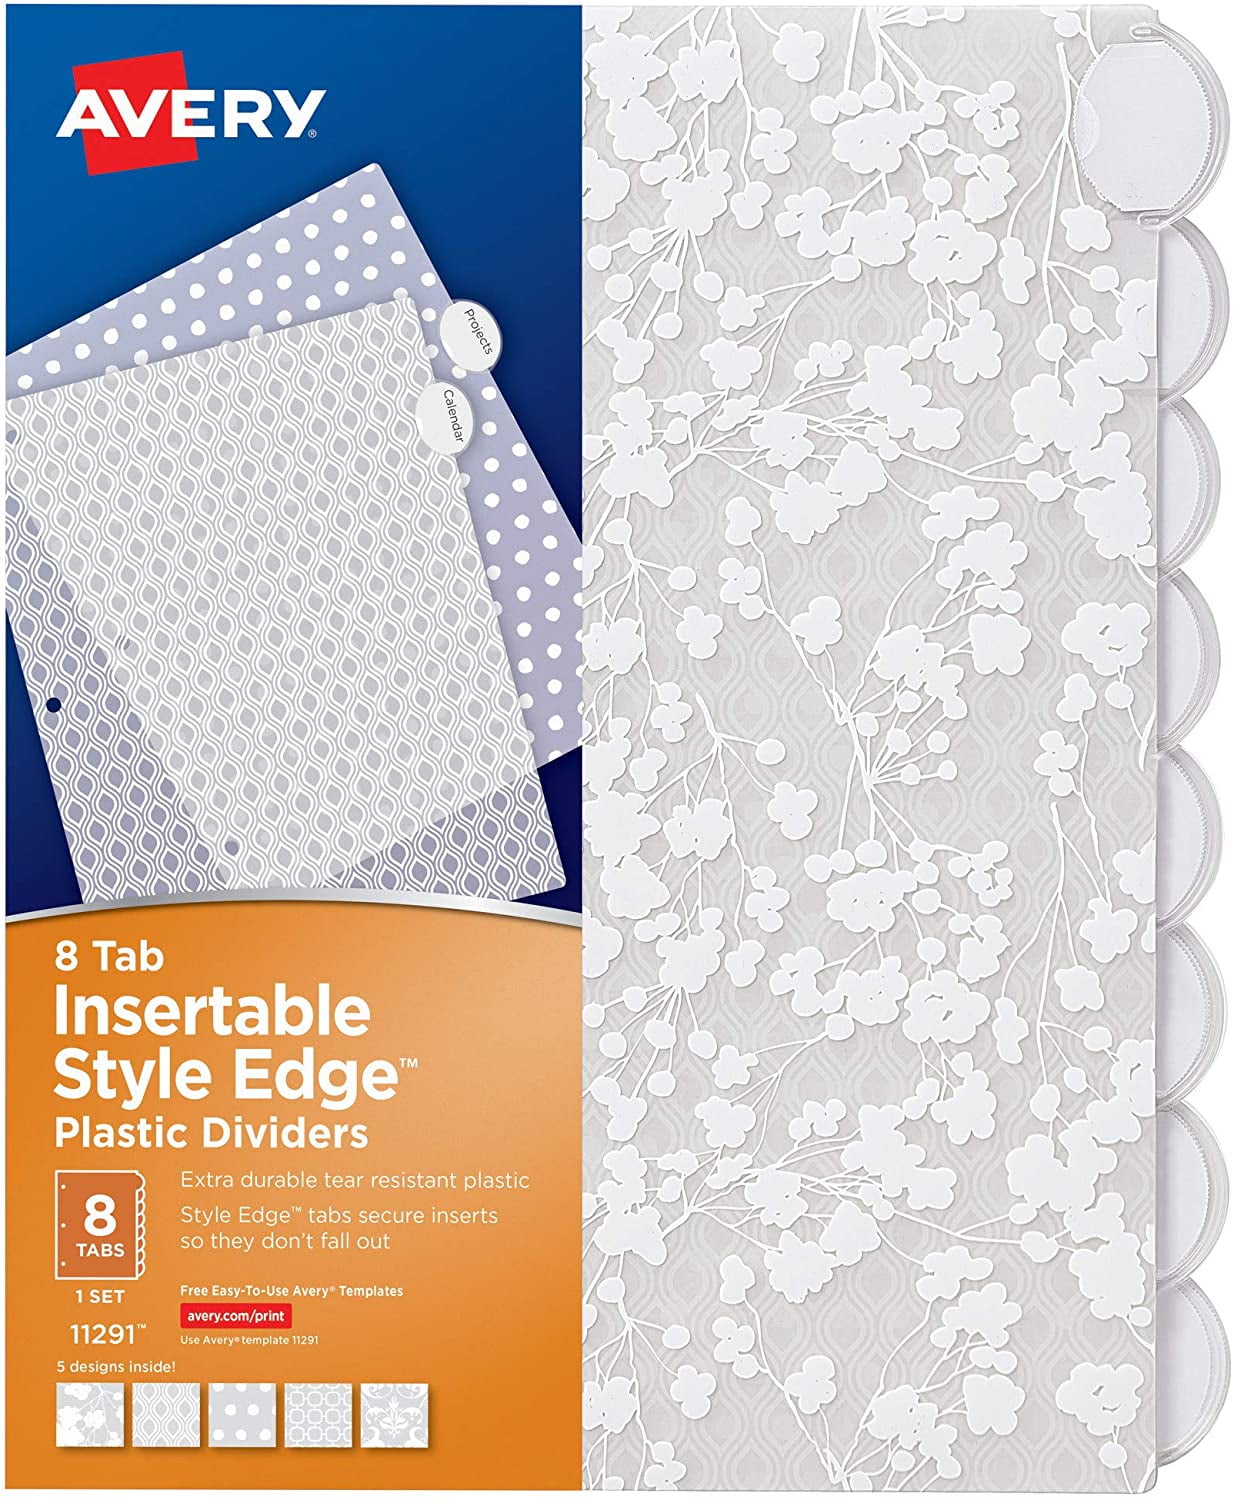 Avery Style Edge Template 11388 / Avery Insertable Style Edge Plastic